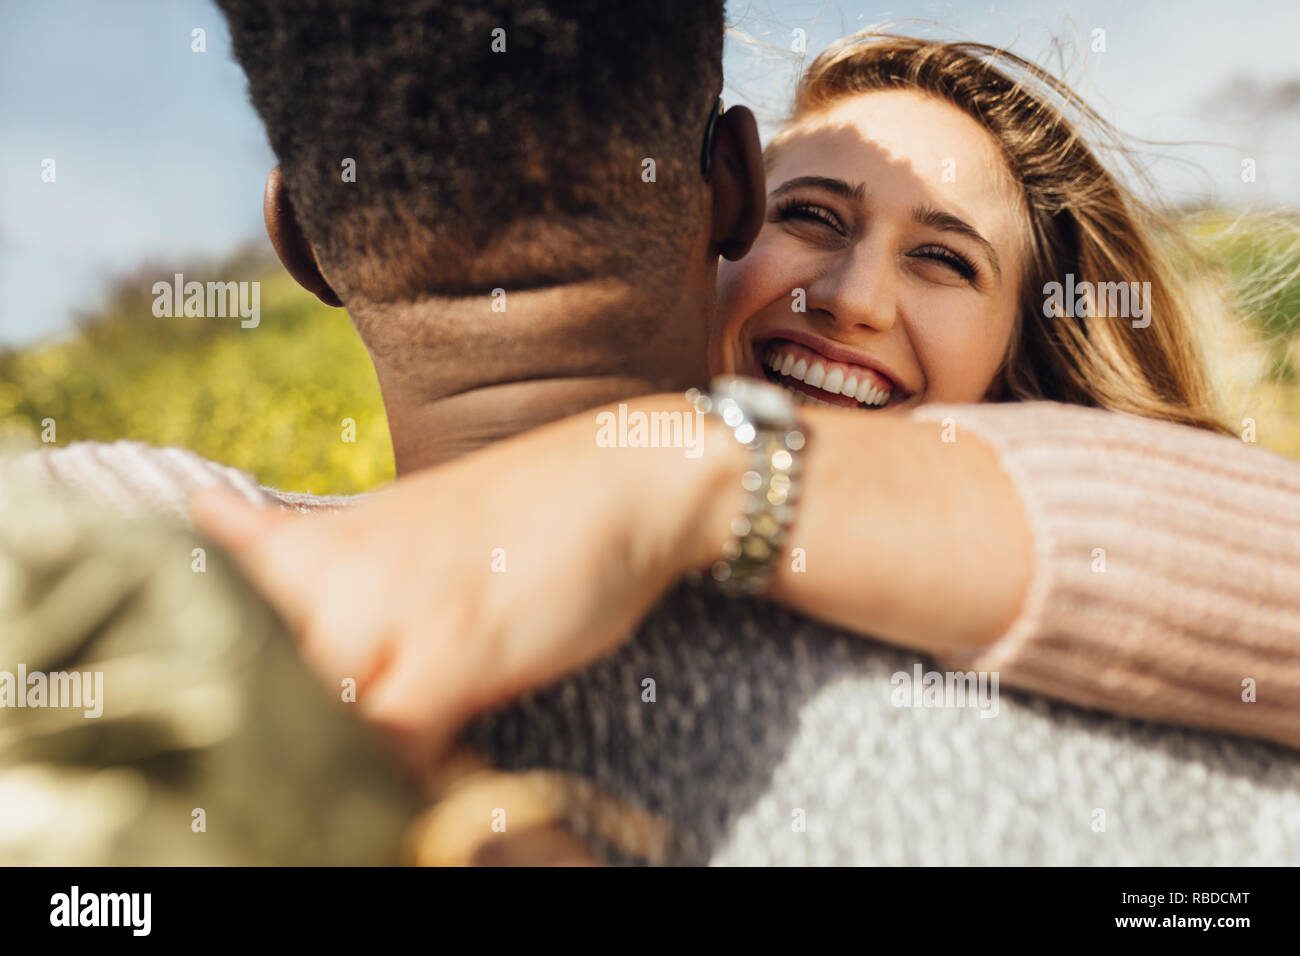 Couple in love standing outdoors. Woman putting her arms around her boyfriend and laughing. Stock Photo